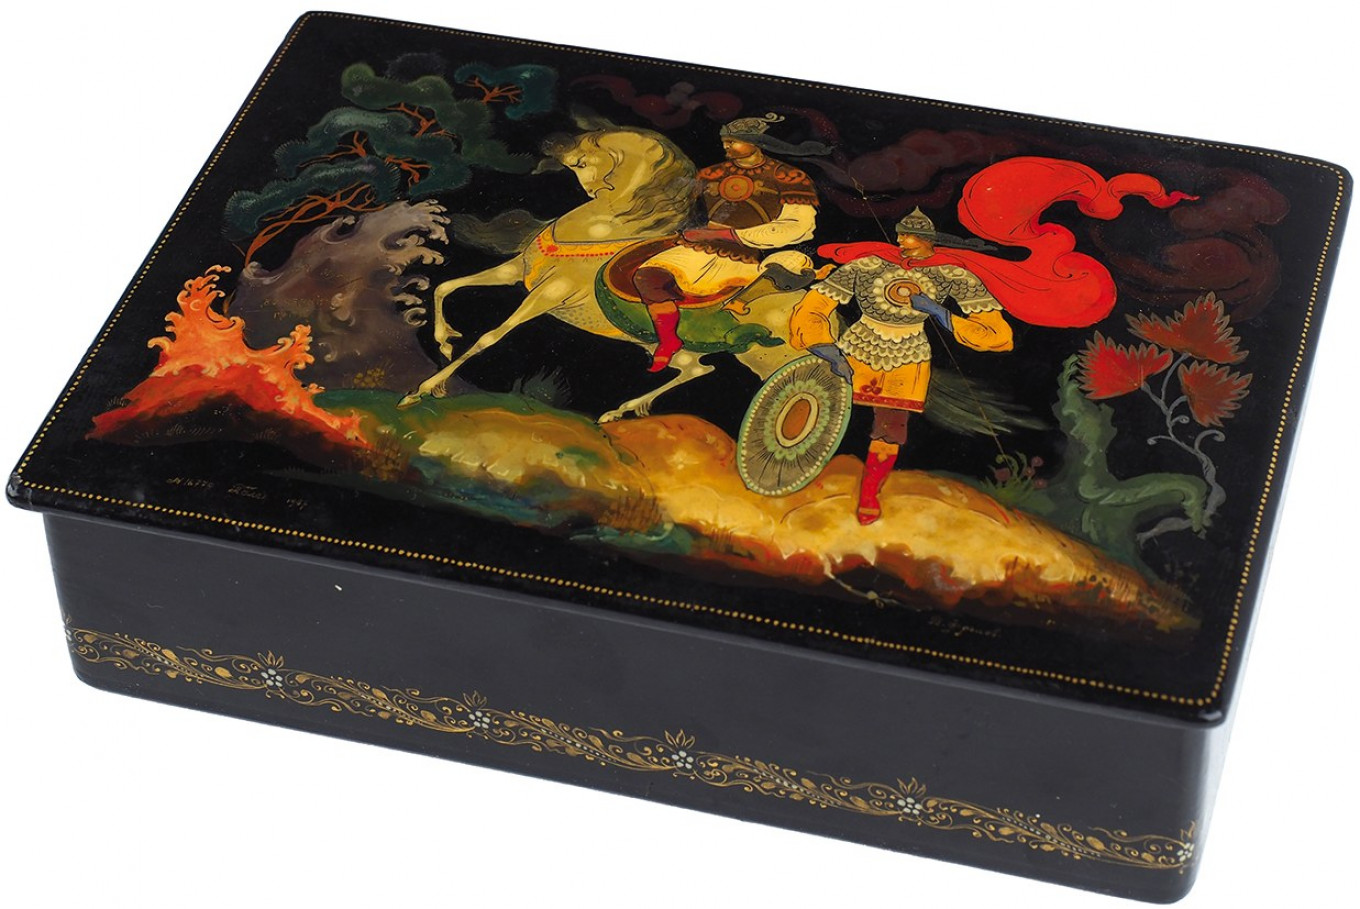 Miniature Miracles: Russian Painted Lacquer Boxes